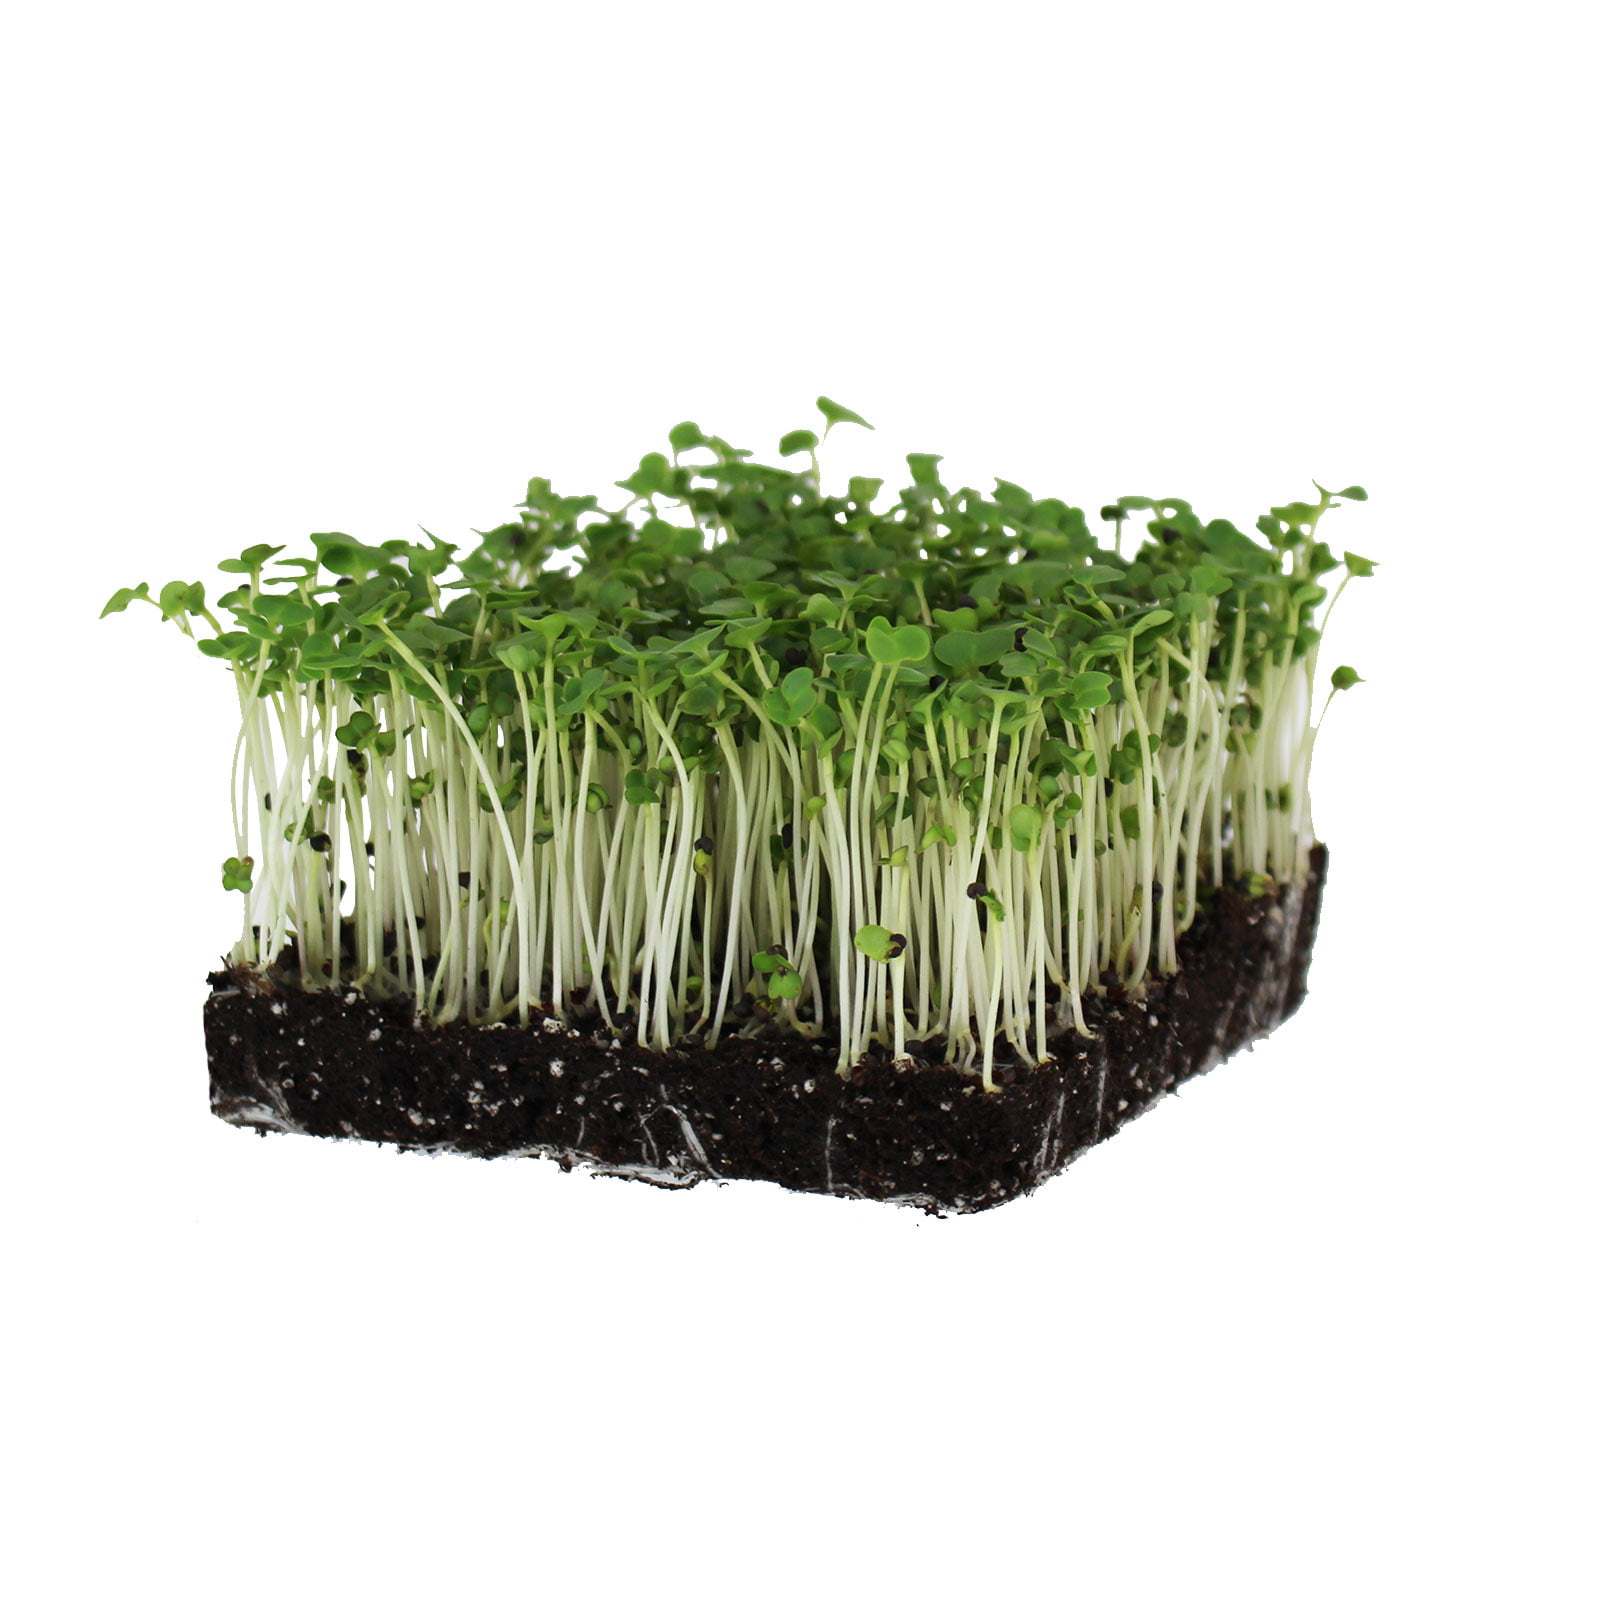 High Germi SEEDELICIOUS Organic Cress Sprouting Seeds Common/Curled 250g Non GMO Healthy Superfood Easy to Sprout